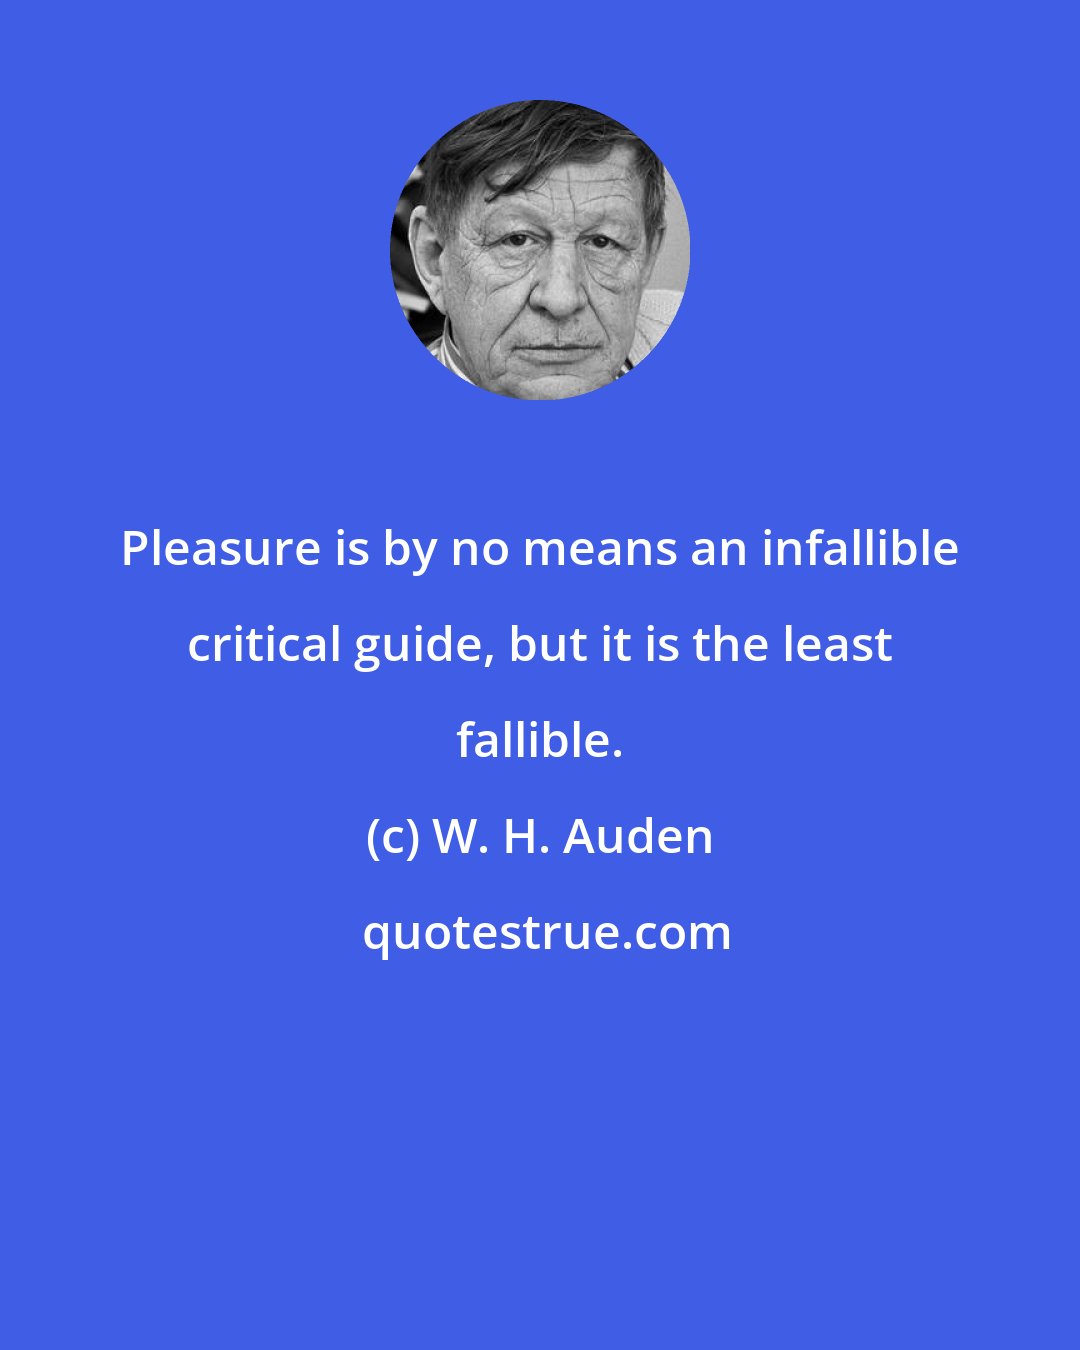 W. H. Auden: Pleasure is by no means an infallible critical guide, but it is the least fallible.